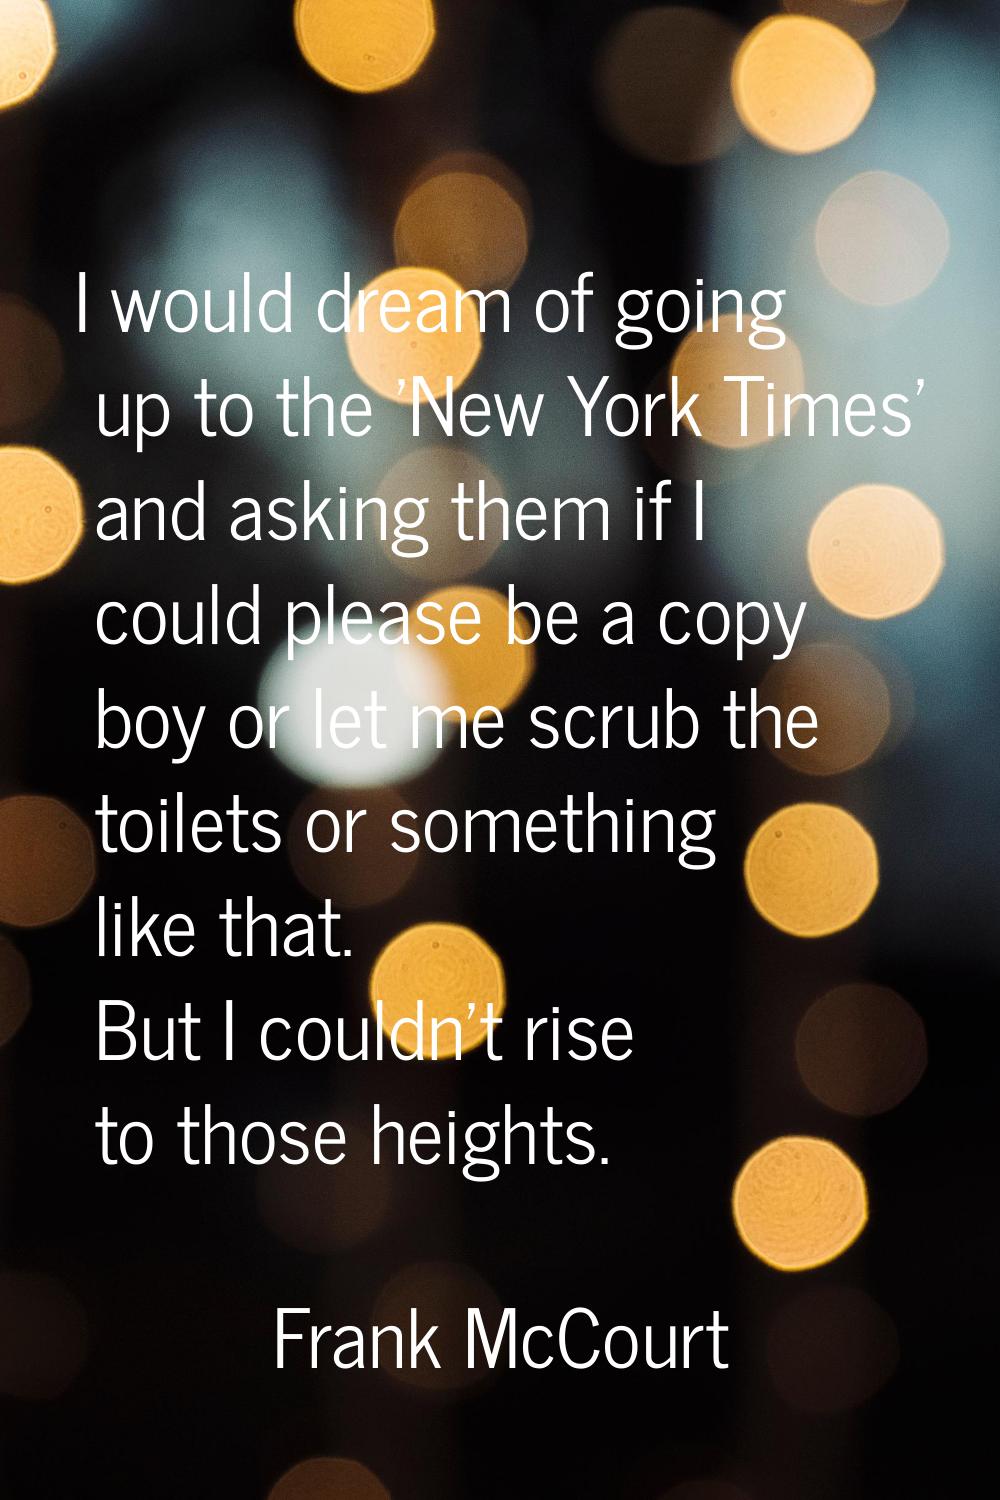 I would dream of going up to the 'New York Times' and asking them if I could please be a copy boy o